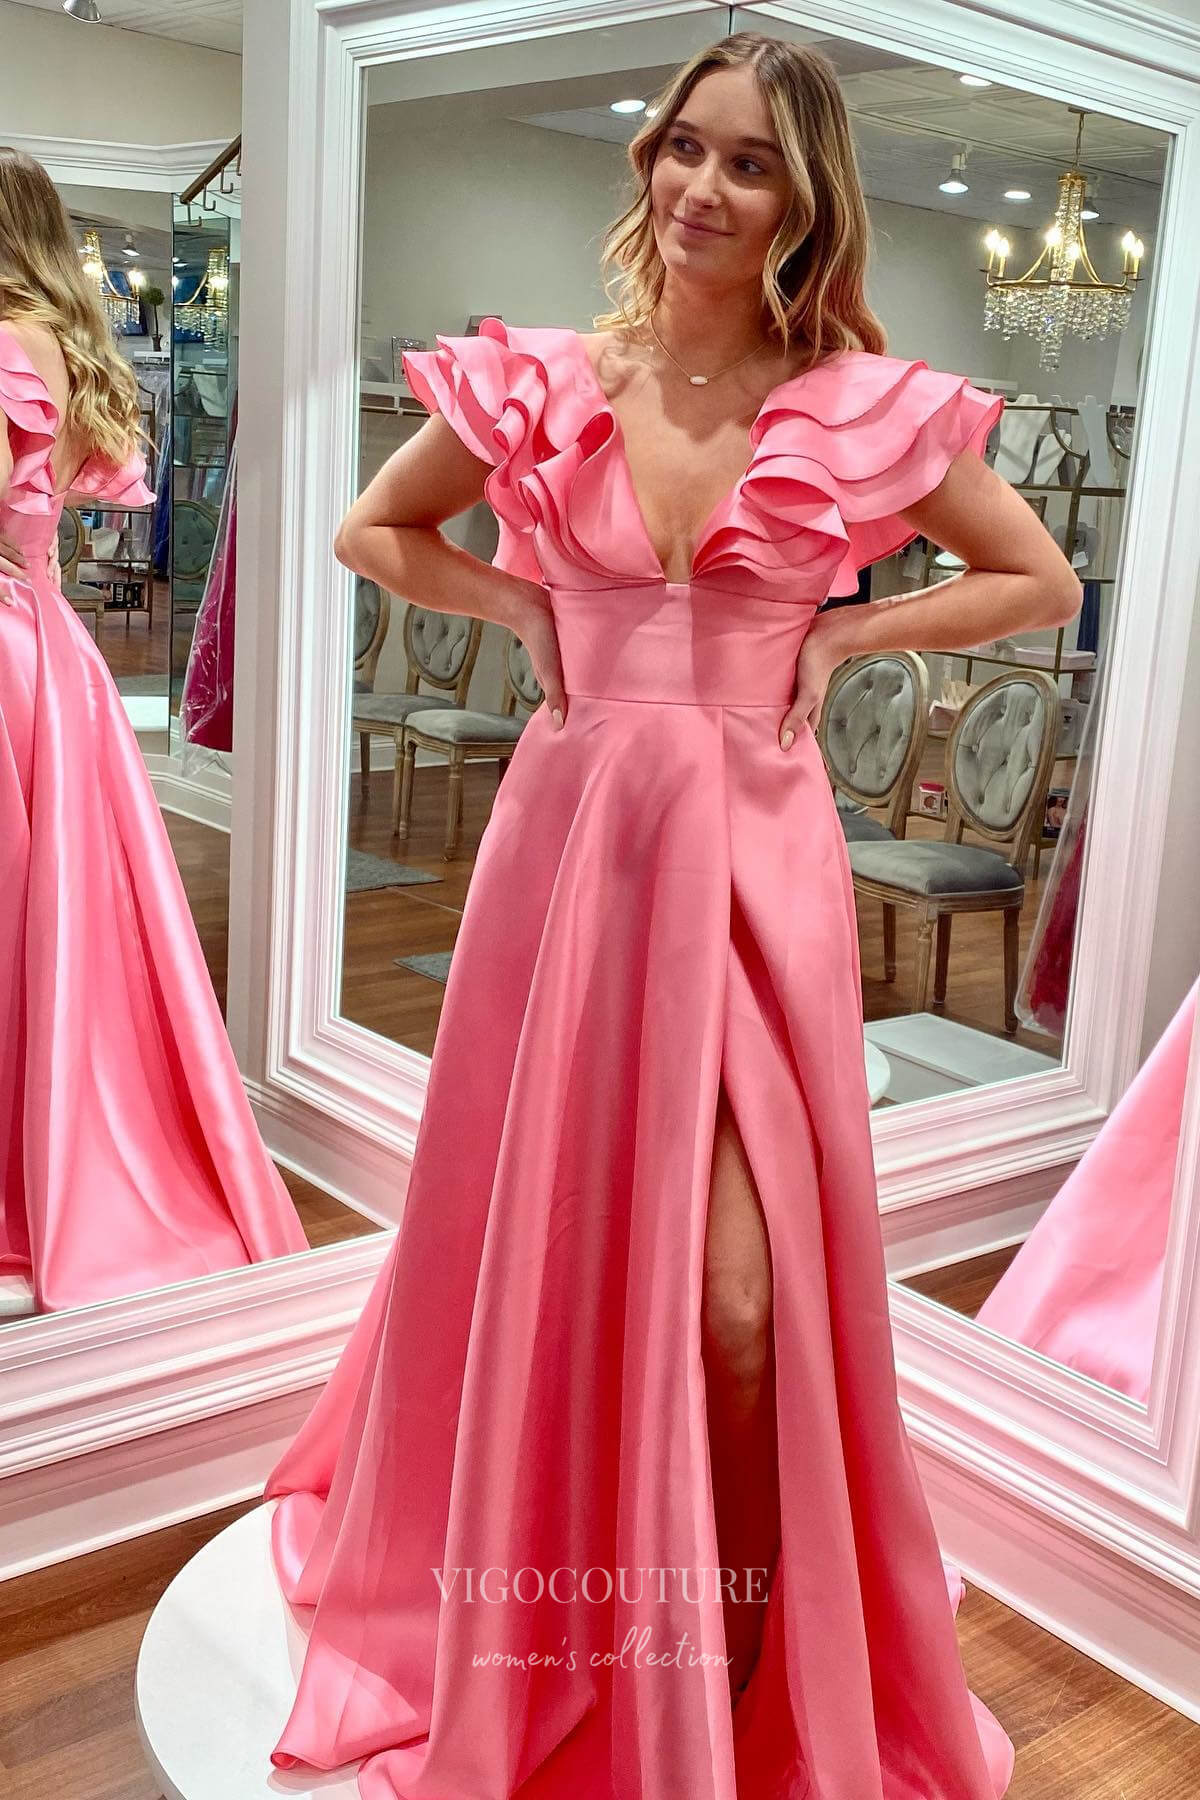 Beautiful Pink Satin Prom Dress with Flattering Slit and Ruffled Shoulder Detail 22191-Prom Dresses-vigocouture-Pink-Custom Size-vigocouture